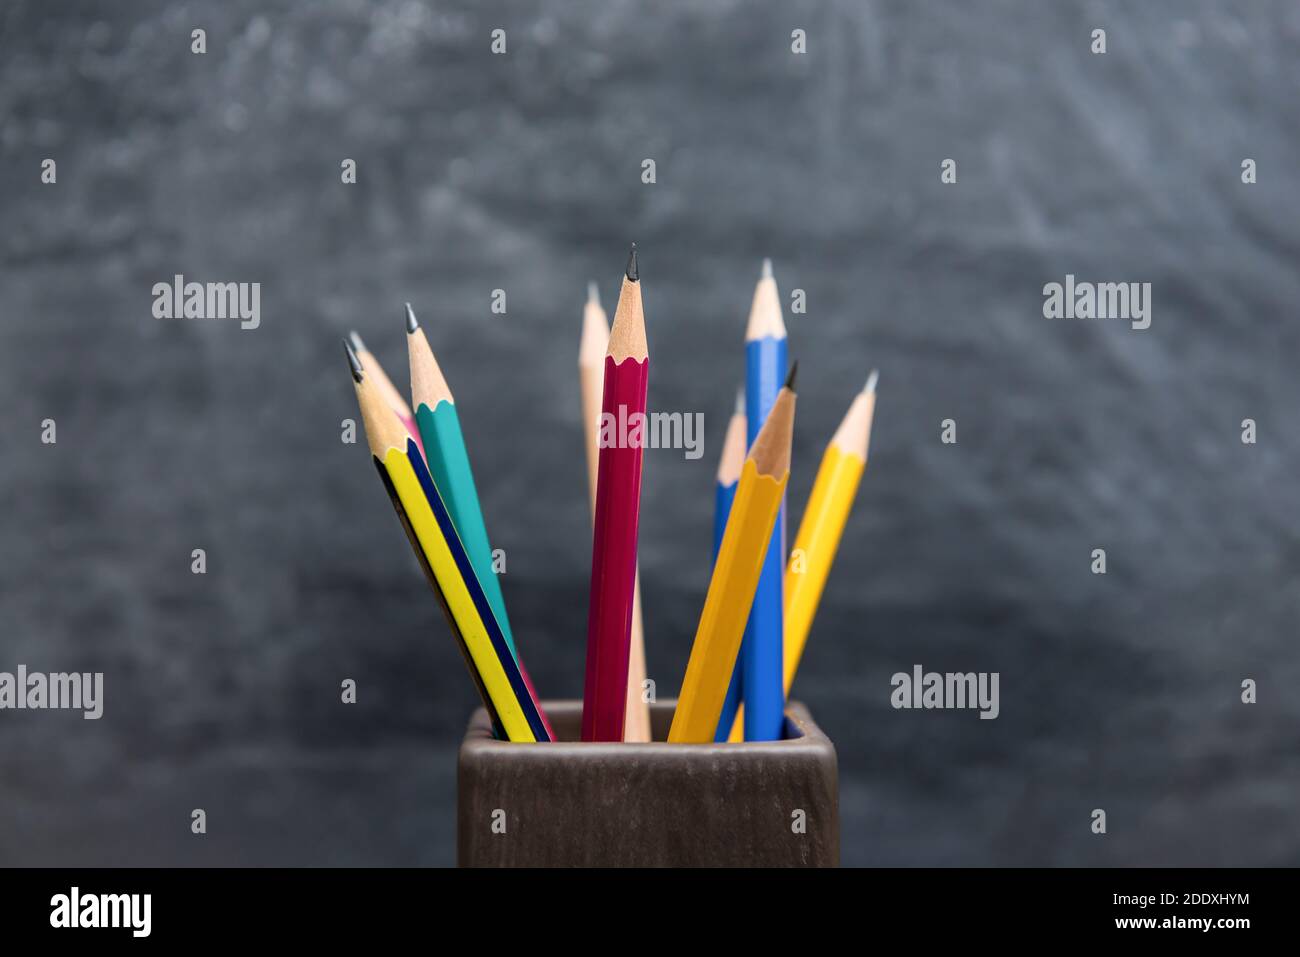 Assorted colorful sharp pencils standing in holder on blurred chalkboard background Stock Photo